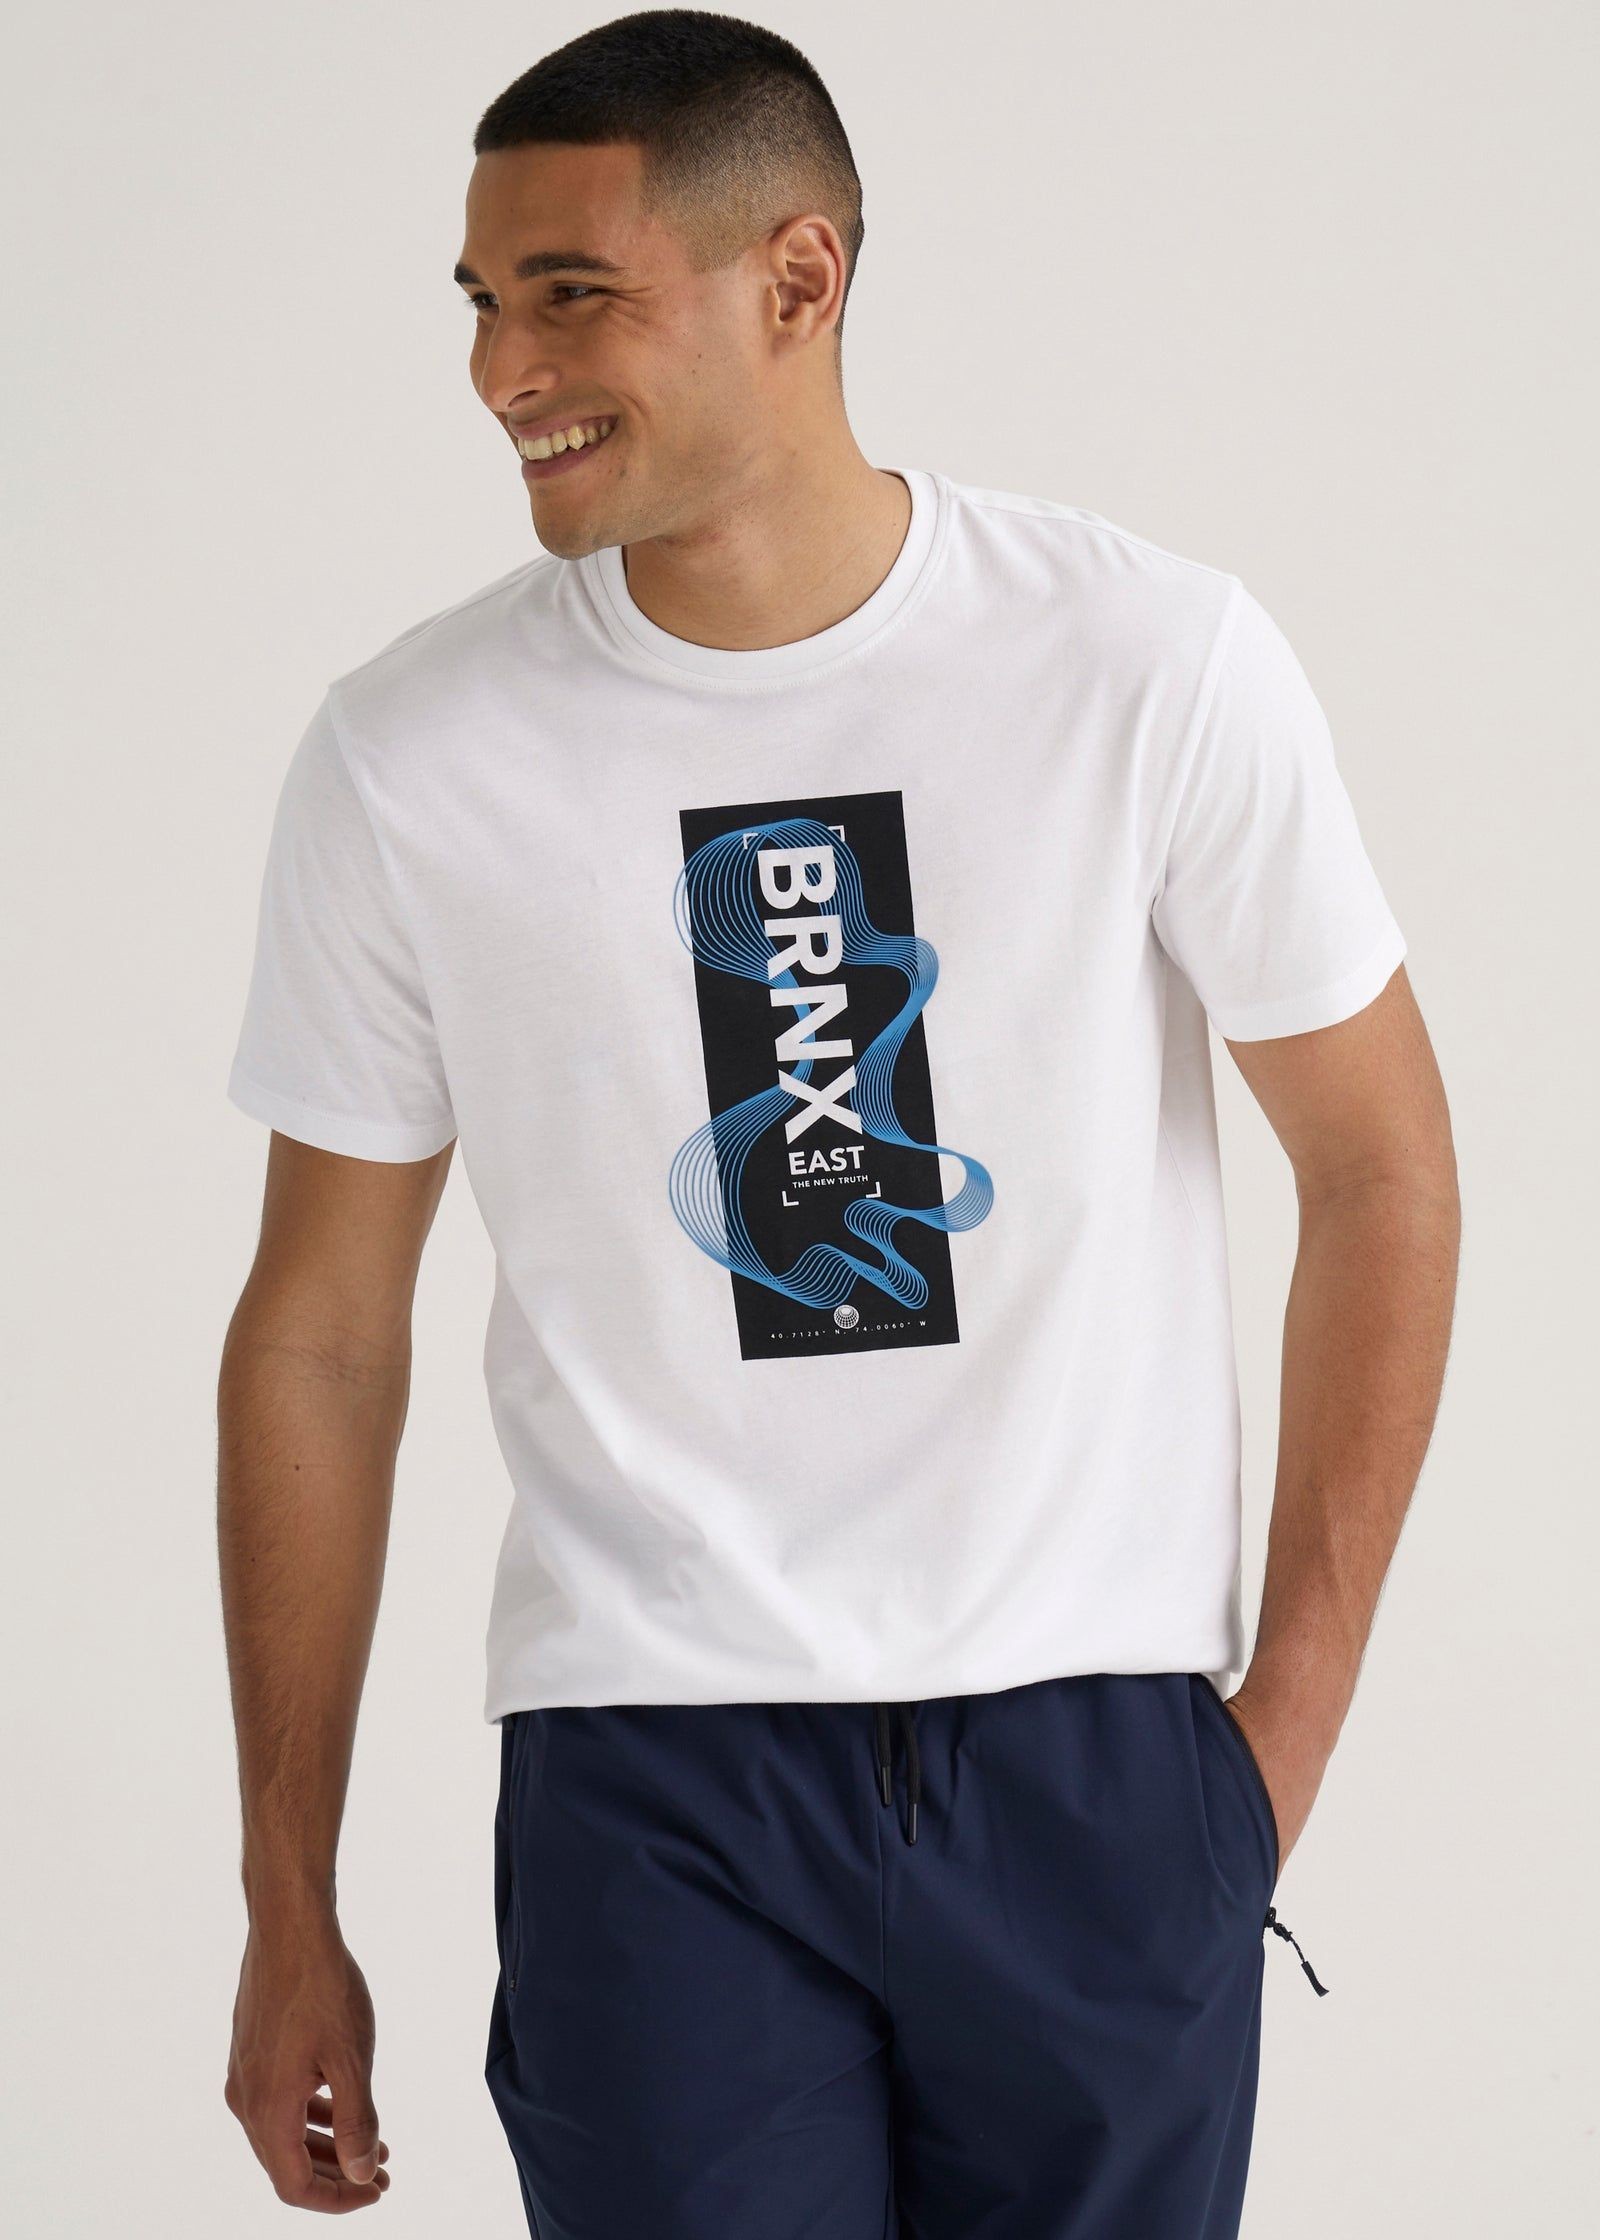 Buy Sportswear Clothes and Accessories in Bahrain - bfab